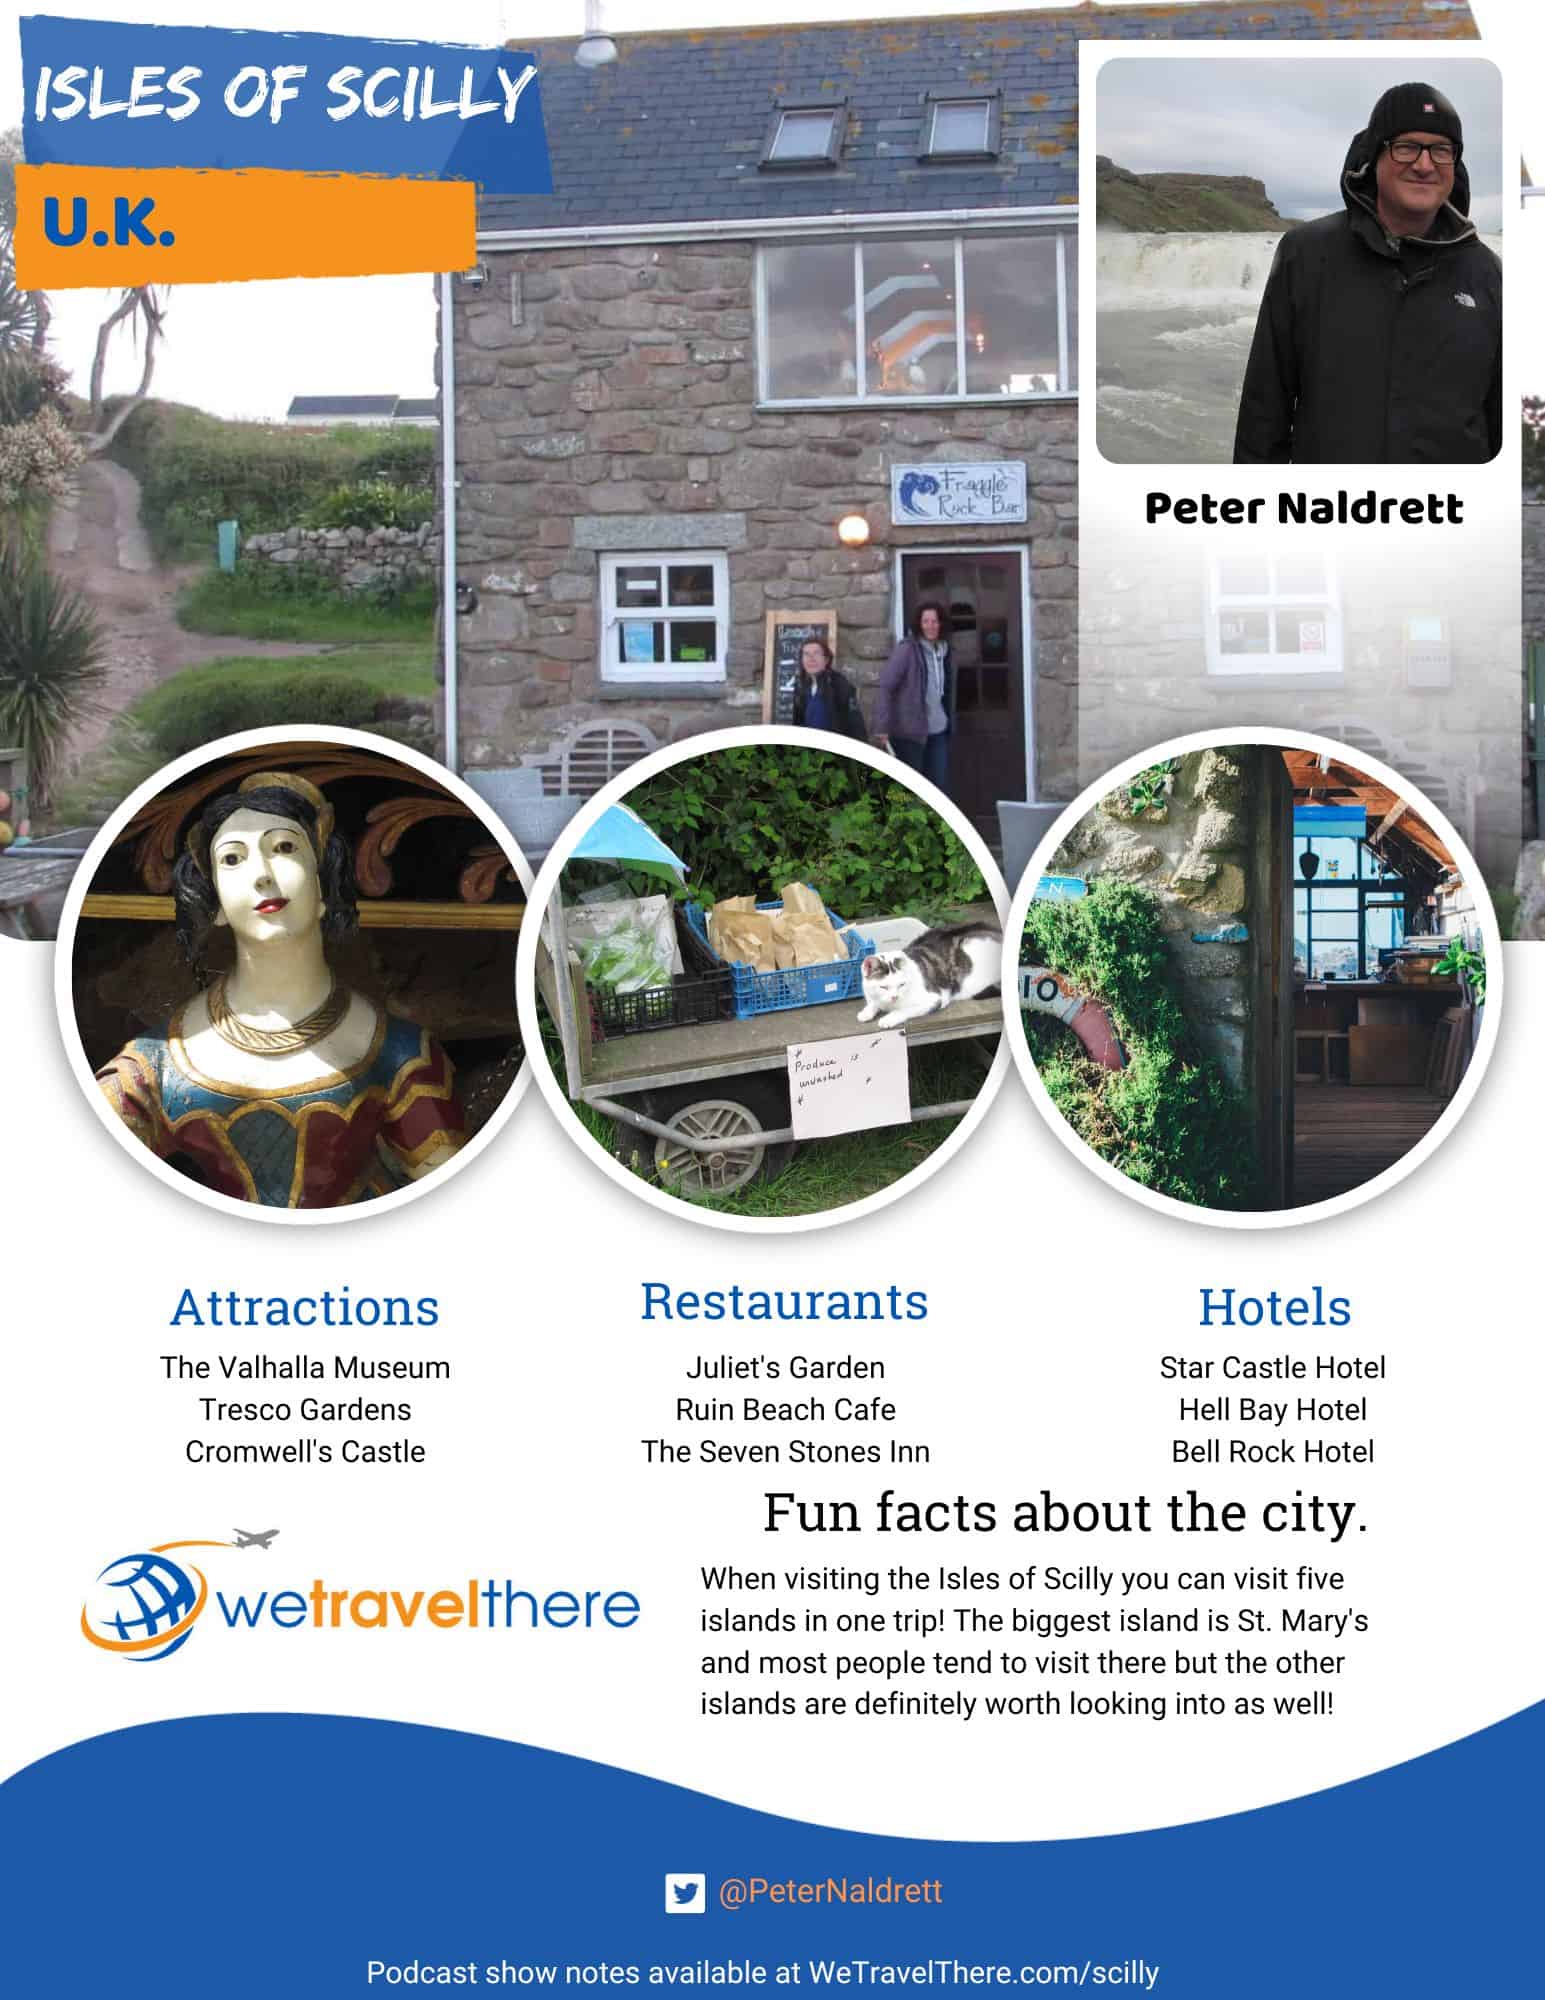 We-Travel-There-Isles-of-Scilly-UK-Peter-Naldrett-podcast-one-sheet